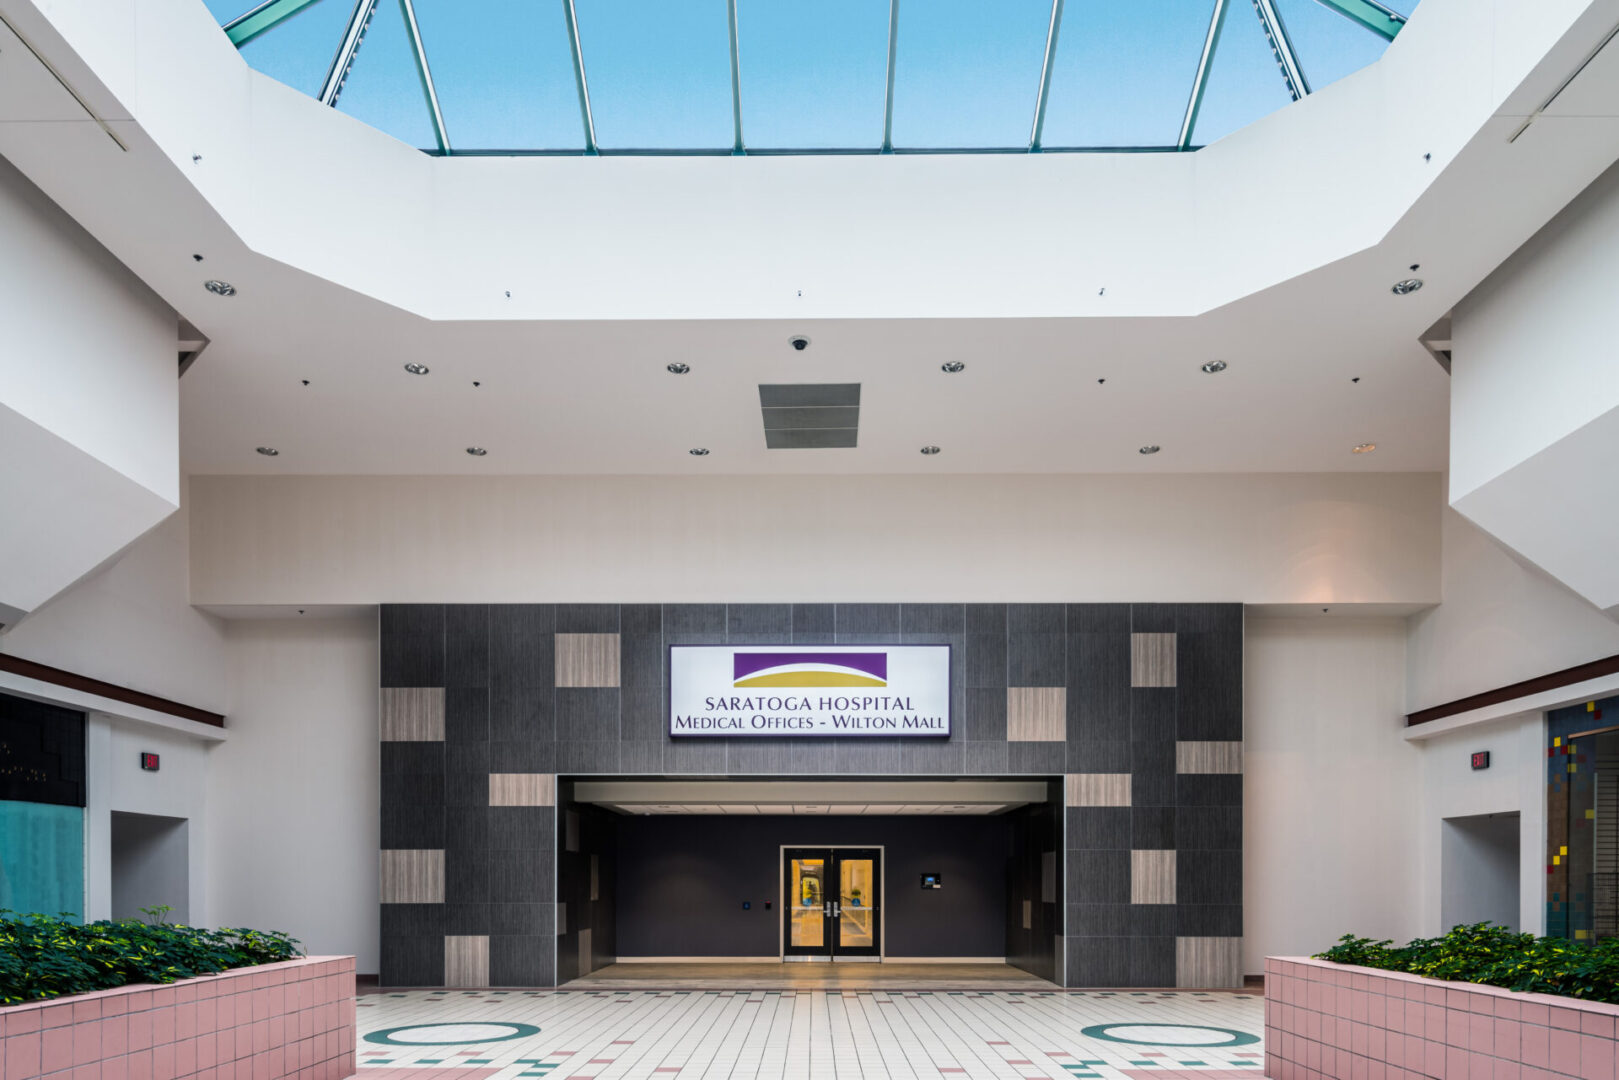 A large lobby with a skylight and a large entrance.